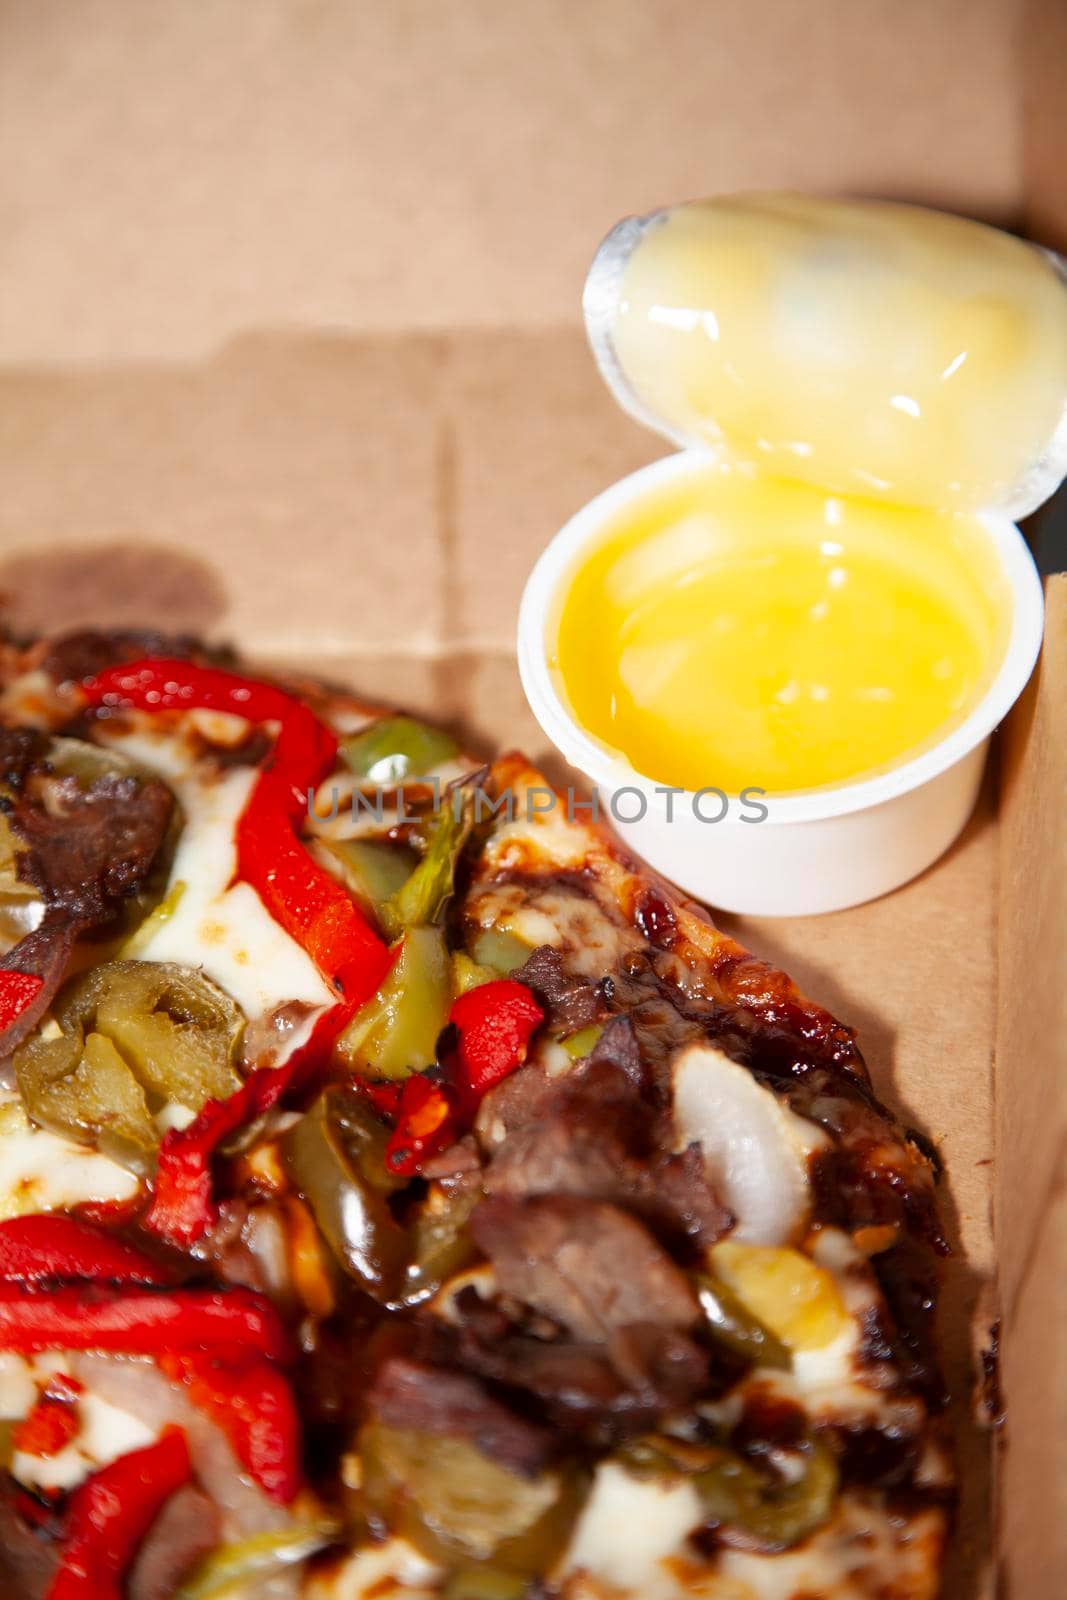 Steak, red bell pepper, jalapeño, green bell pepper, and onion pizza in a cardboard carry out container with garlic dipping sauce